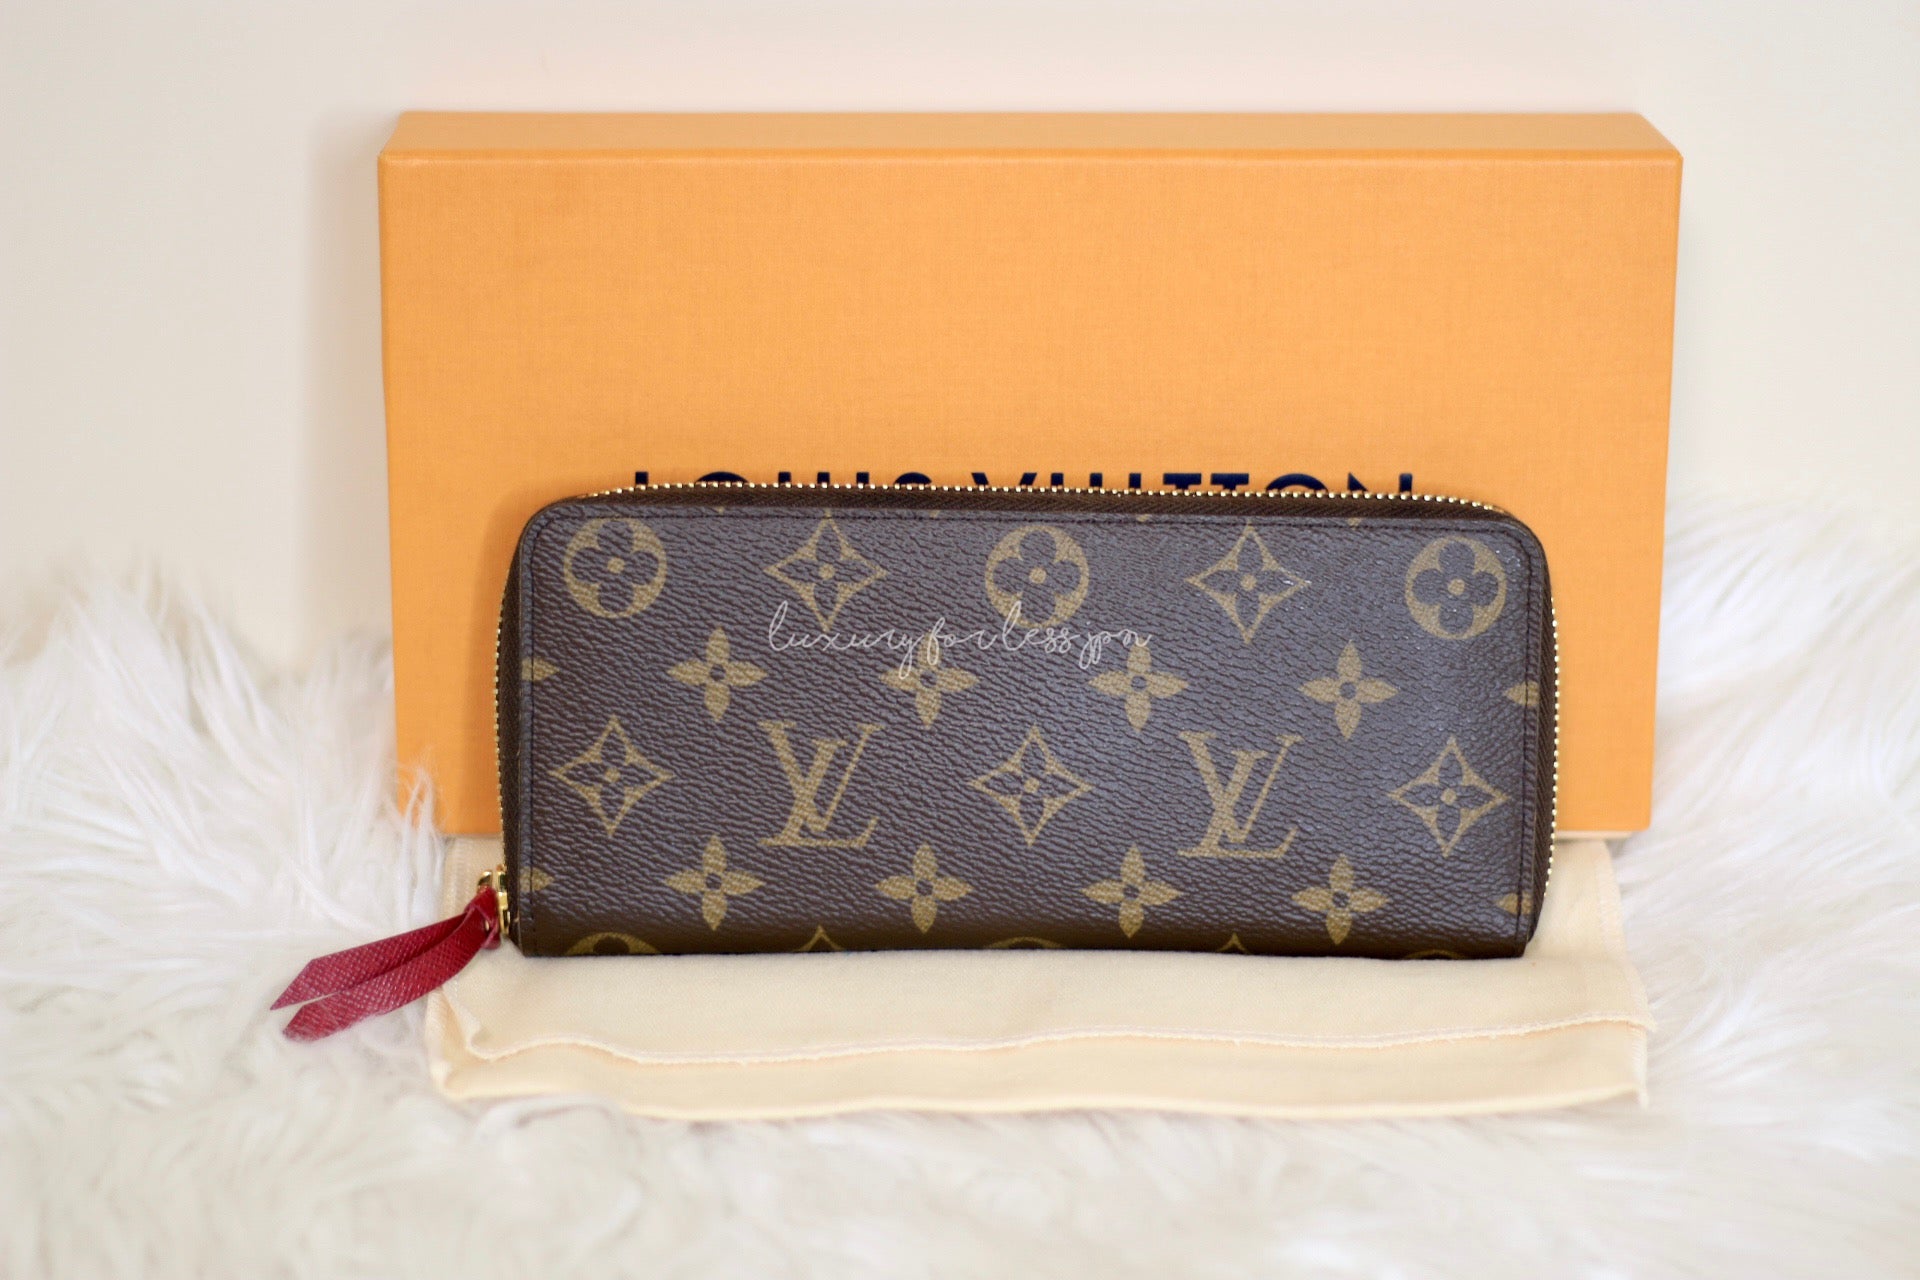 LOUIS VUITTON KEY POUCH IN ORANGE PERFORATED MONOGRAM CANVAS KEY